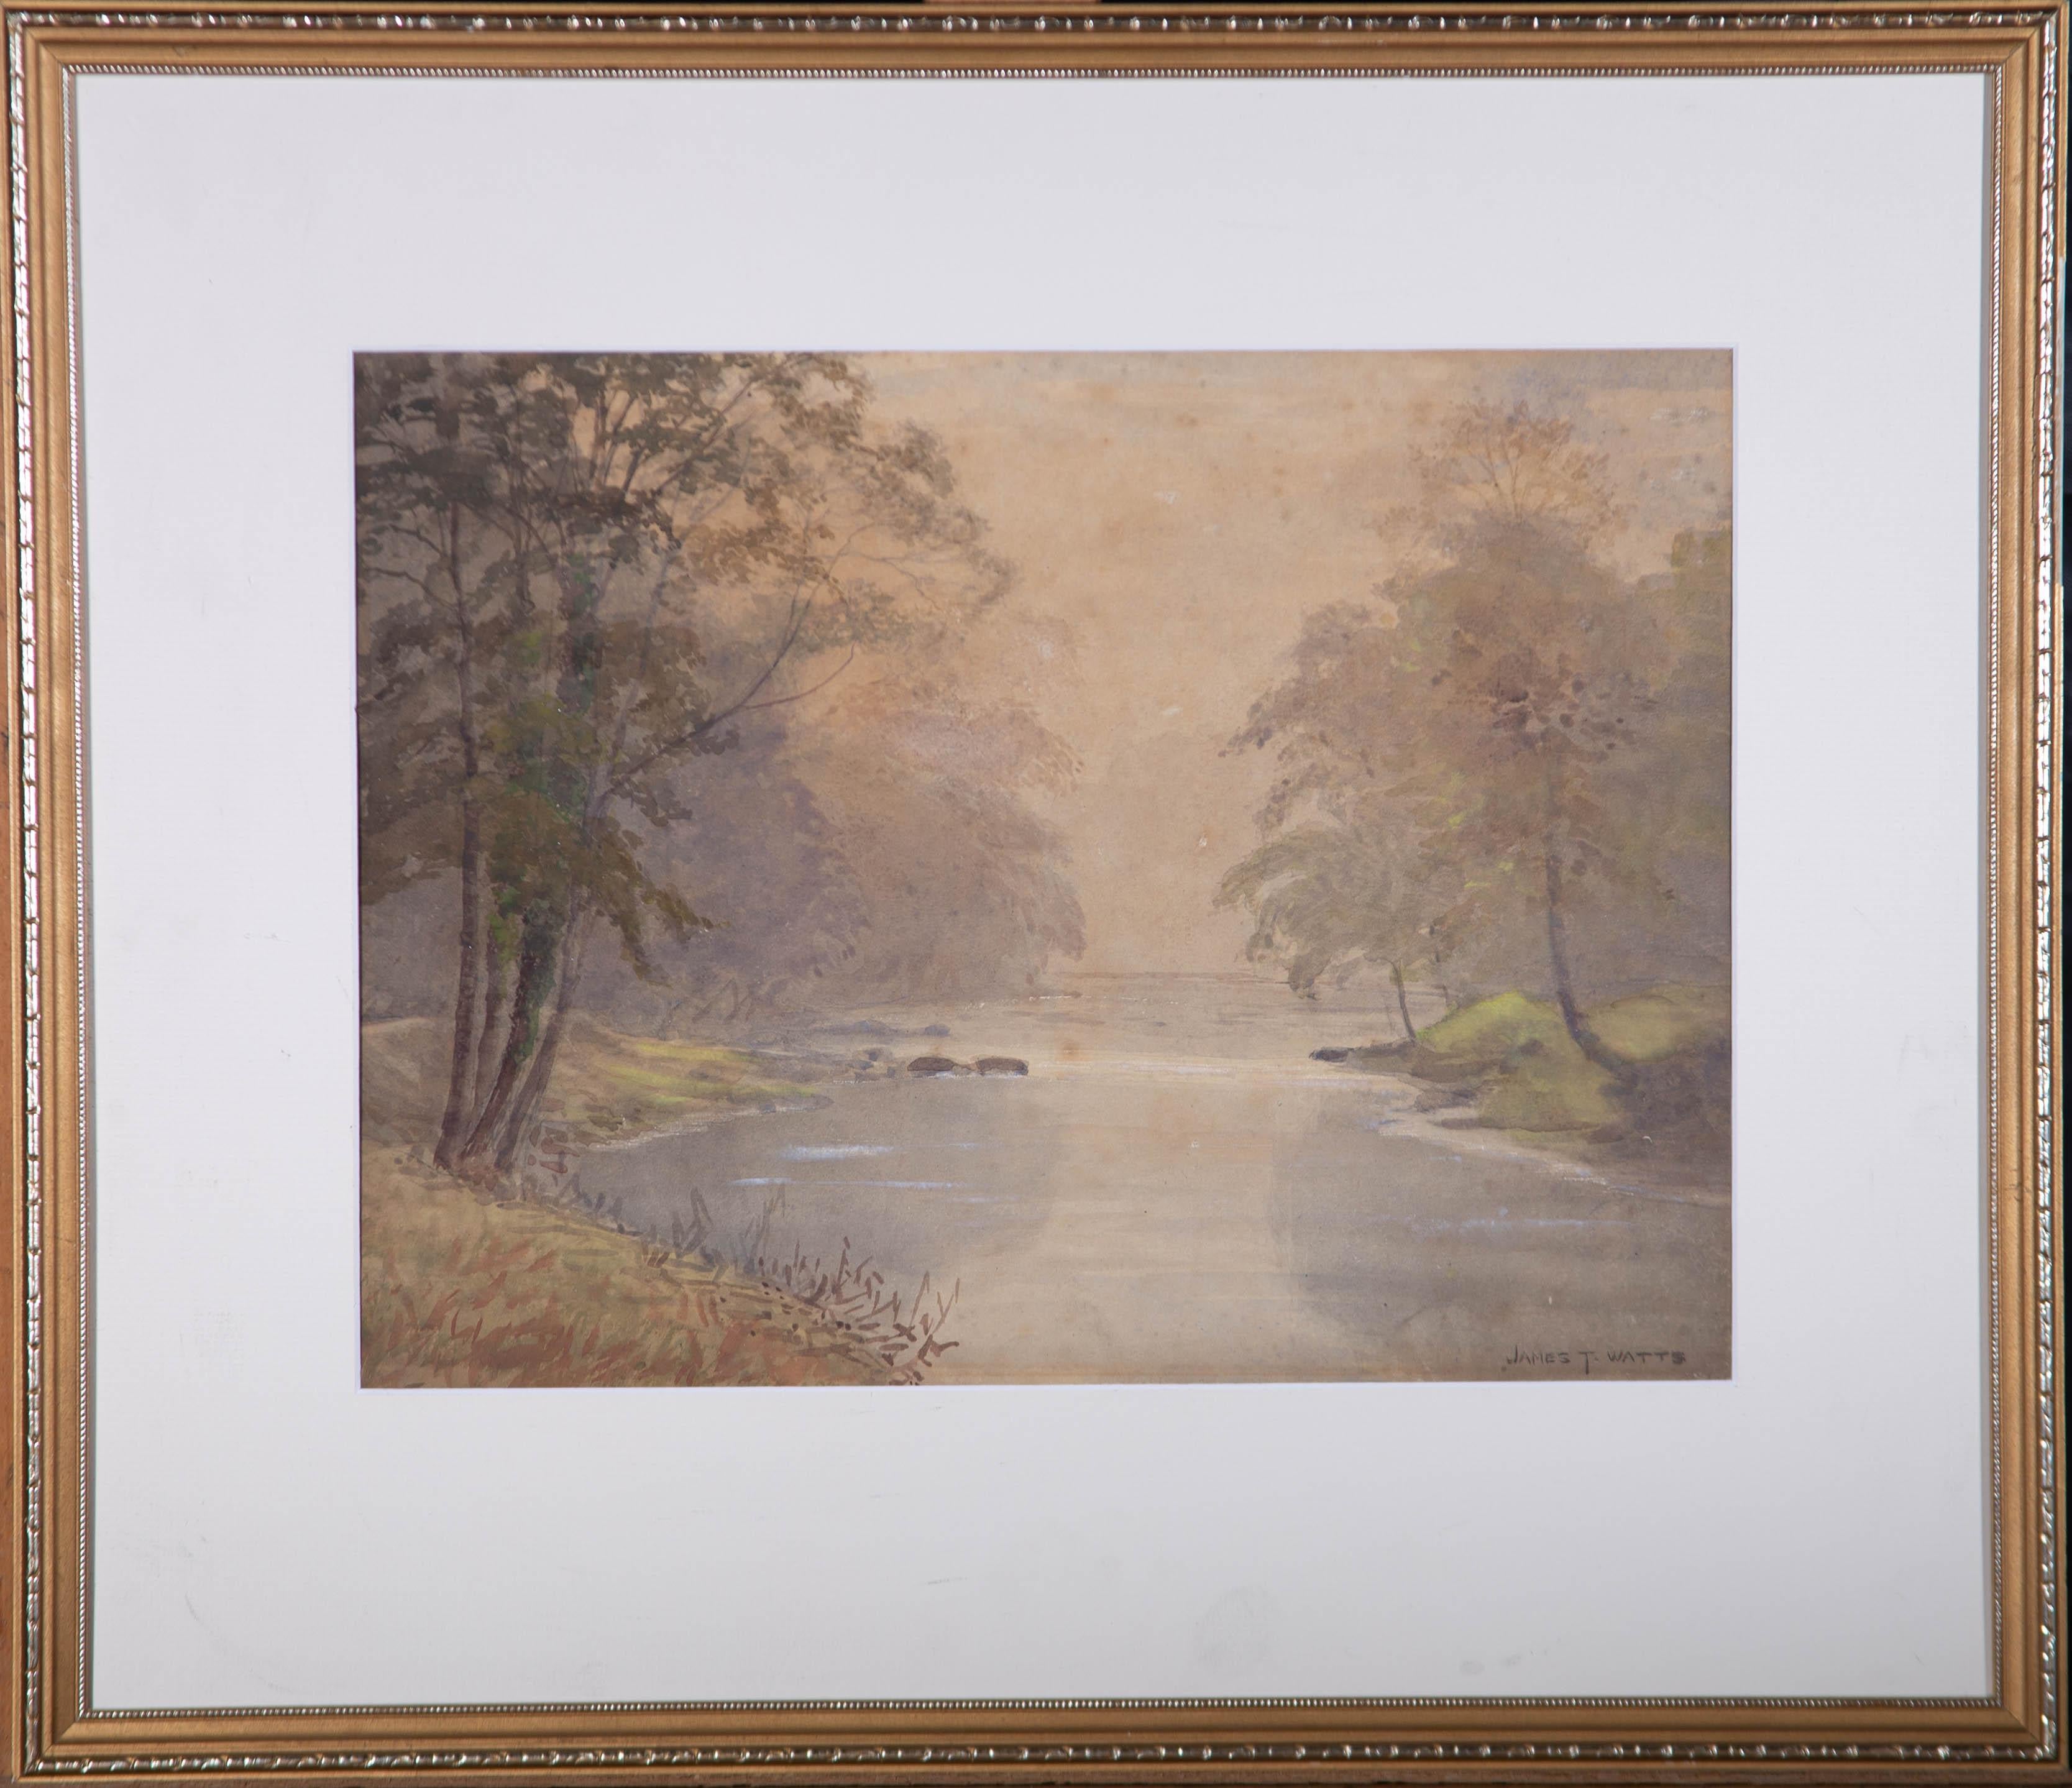 A misty scene of a gentle river in Autumn. Presented in a white mount and thin gilt-effect wooden frame. Signed to the lower-right edge. Later date and inscription to the reverse. On watercolour paper.
